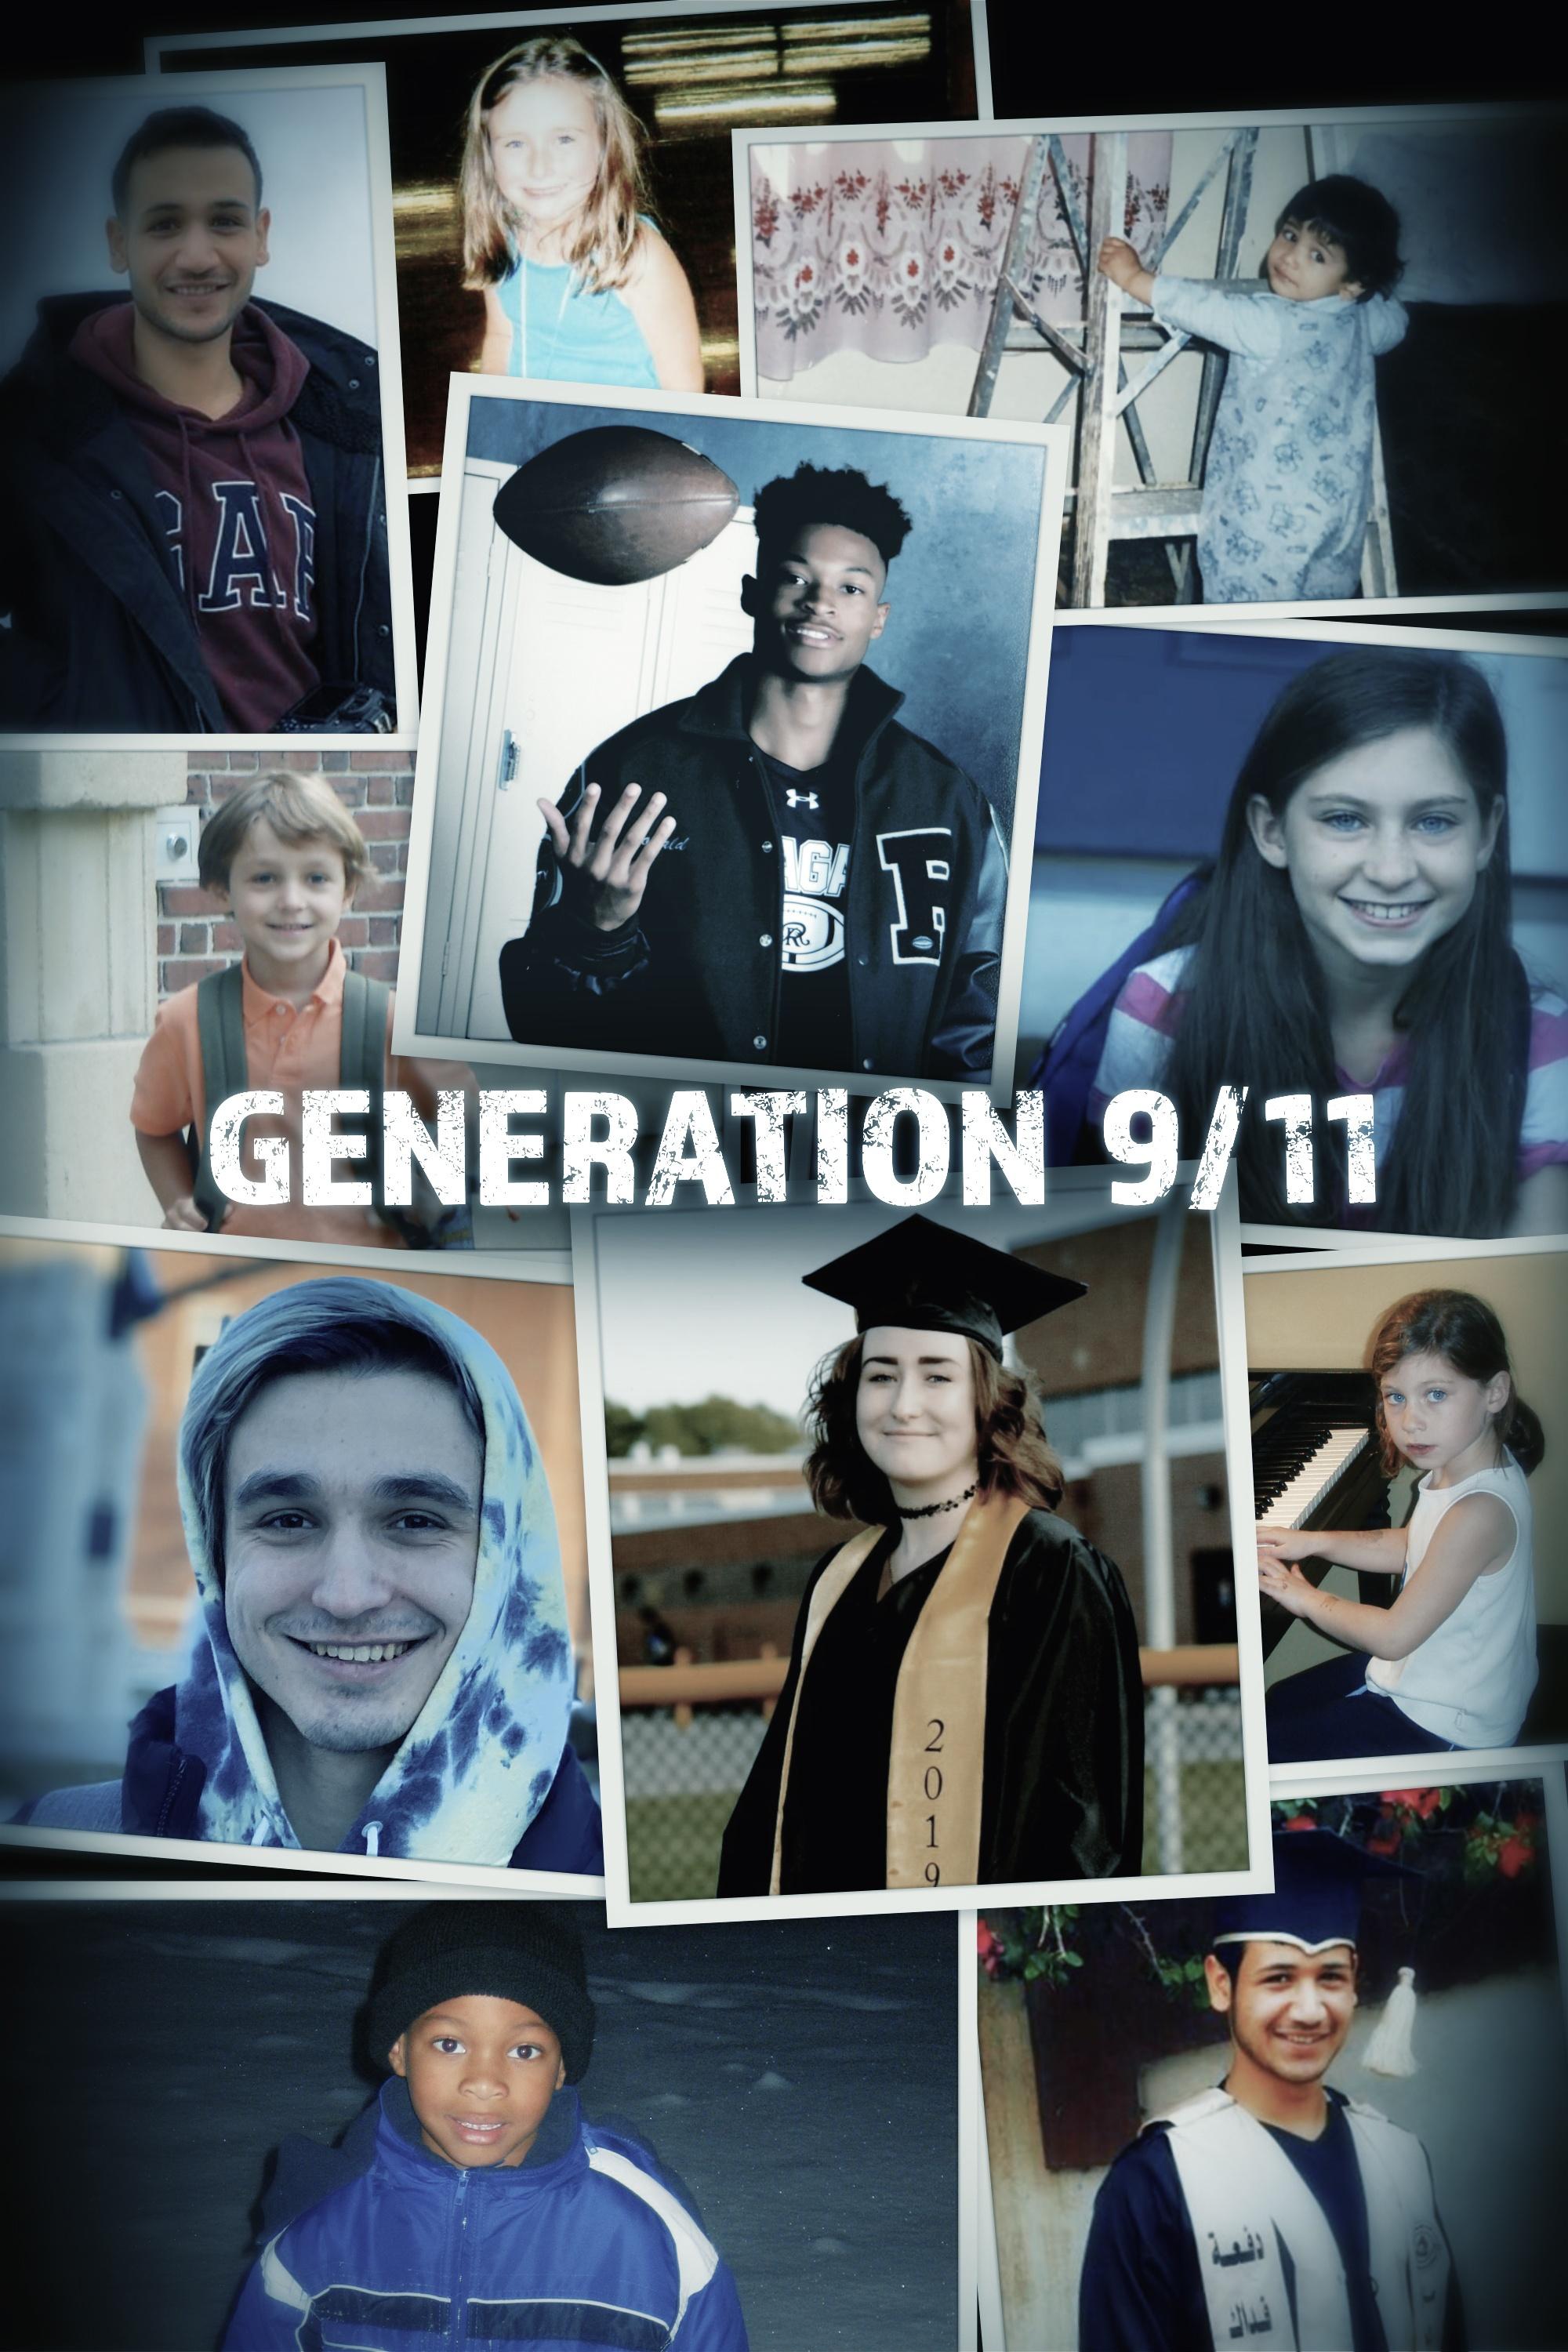 film poster for generation 9/11 featuring multiple photographs of various young individuals in the style of a family album.